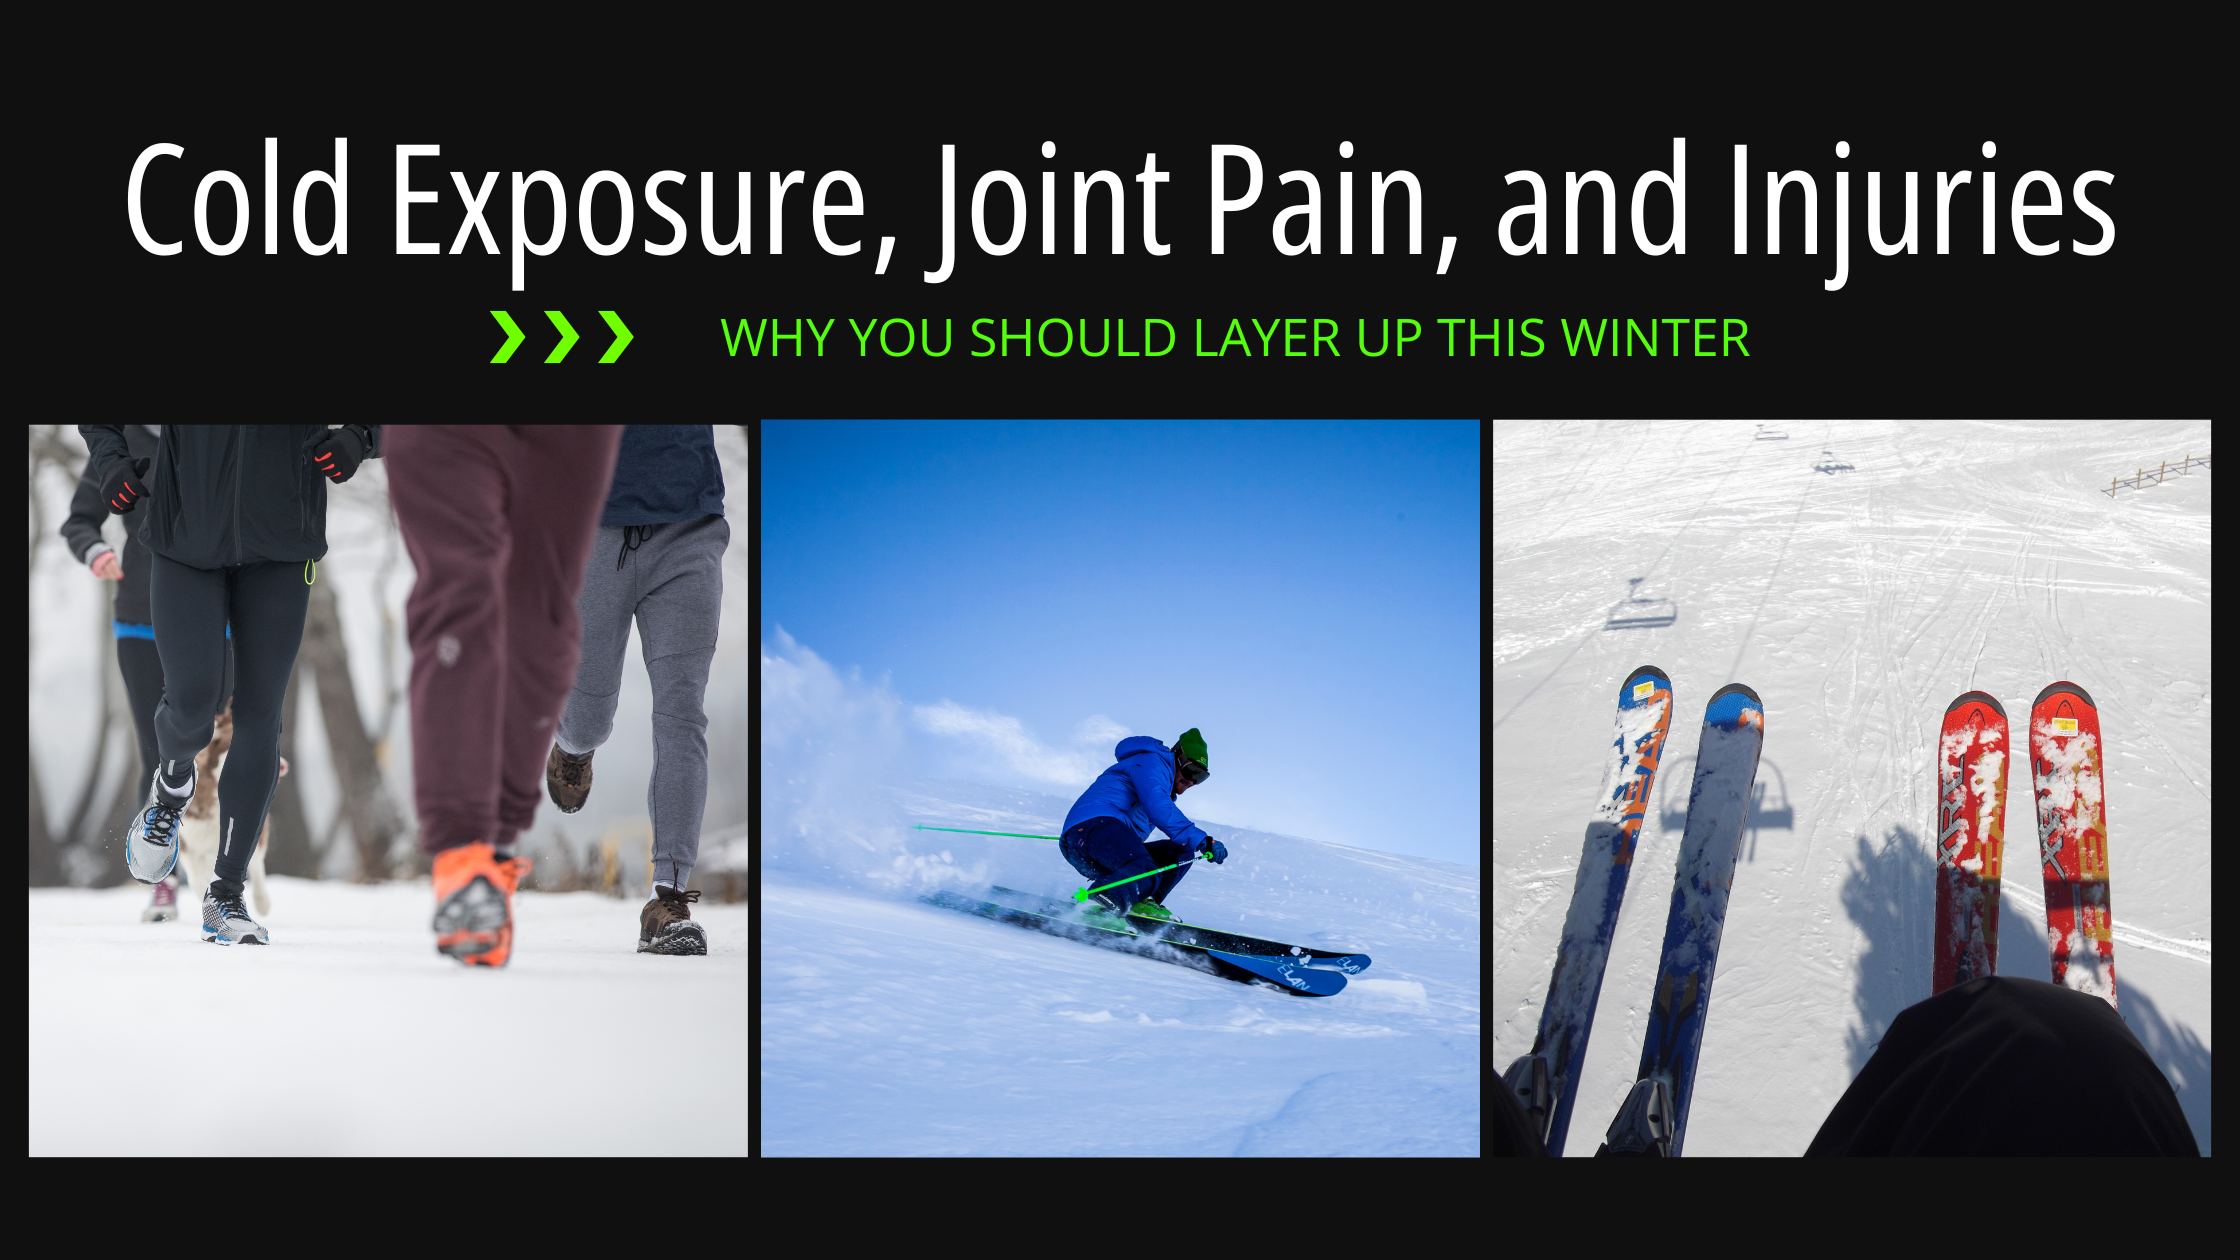 Cold exposure, joint pain, and injuries